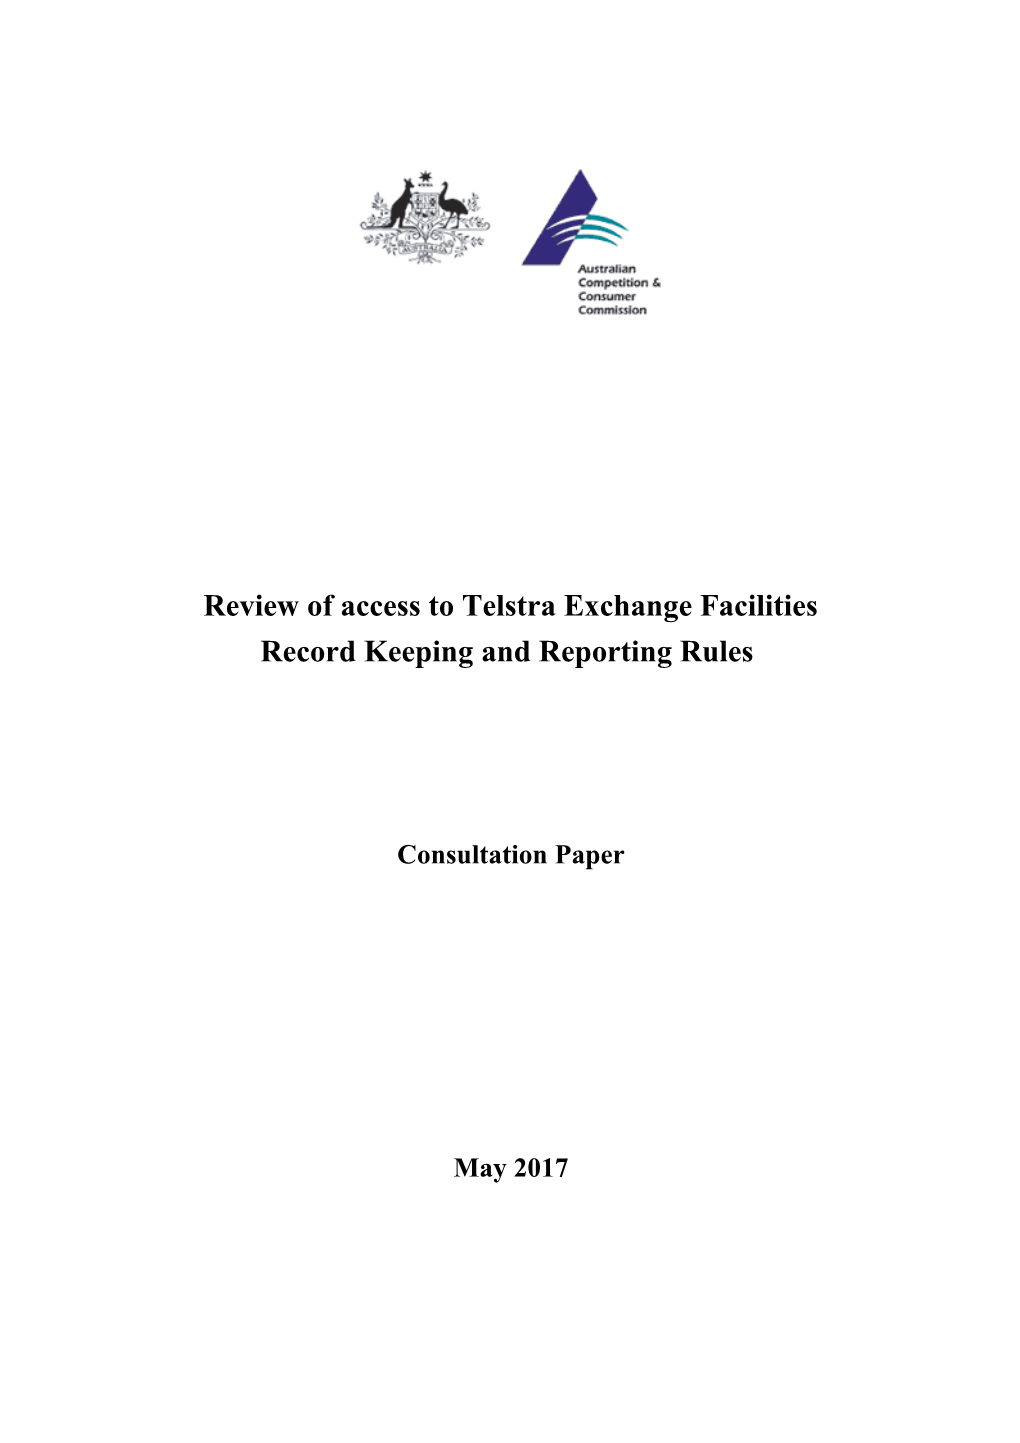 Review of Access to Telstra Exchange Facilities